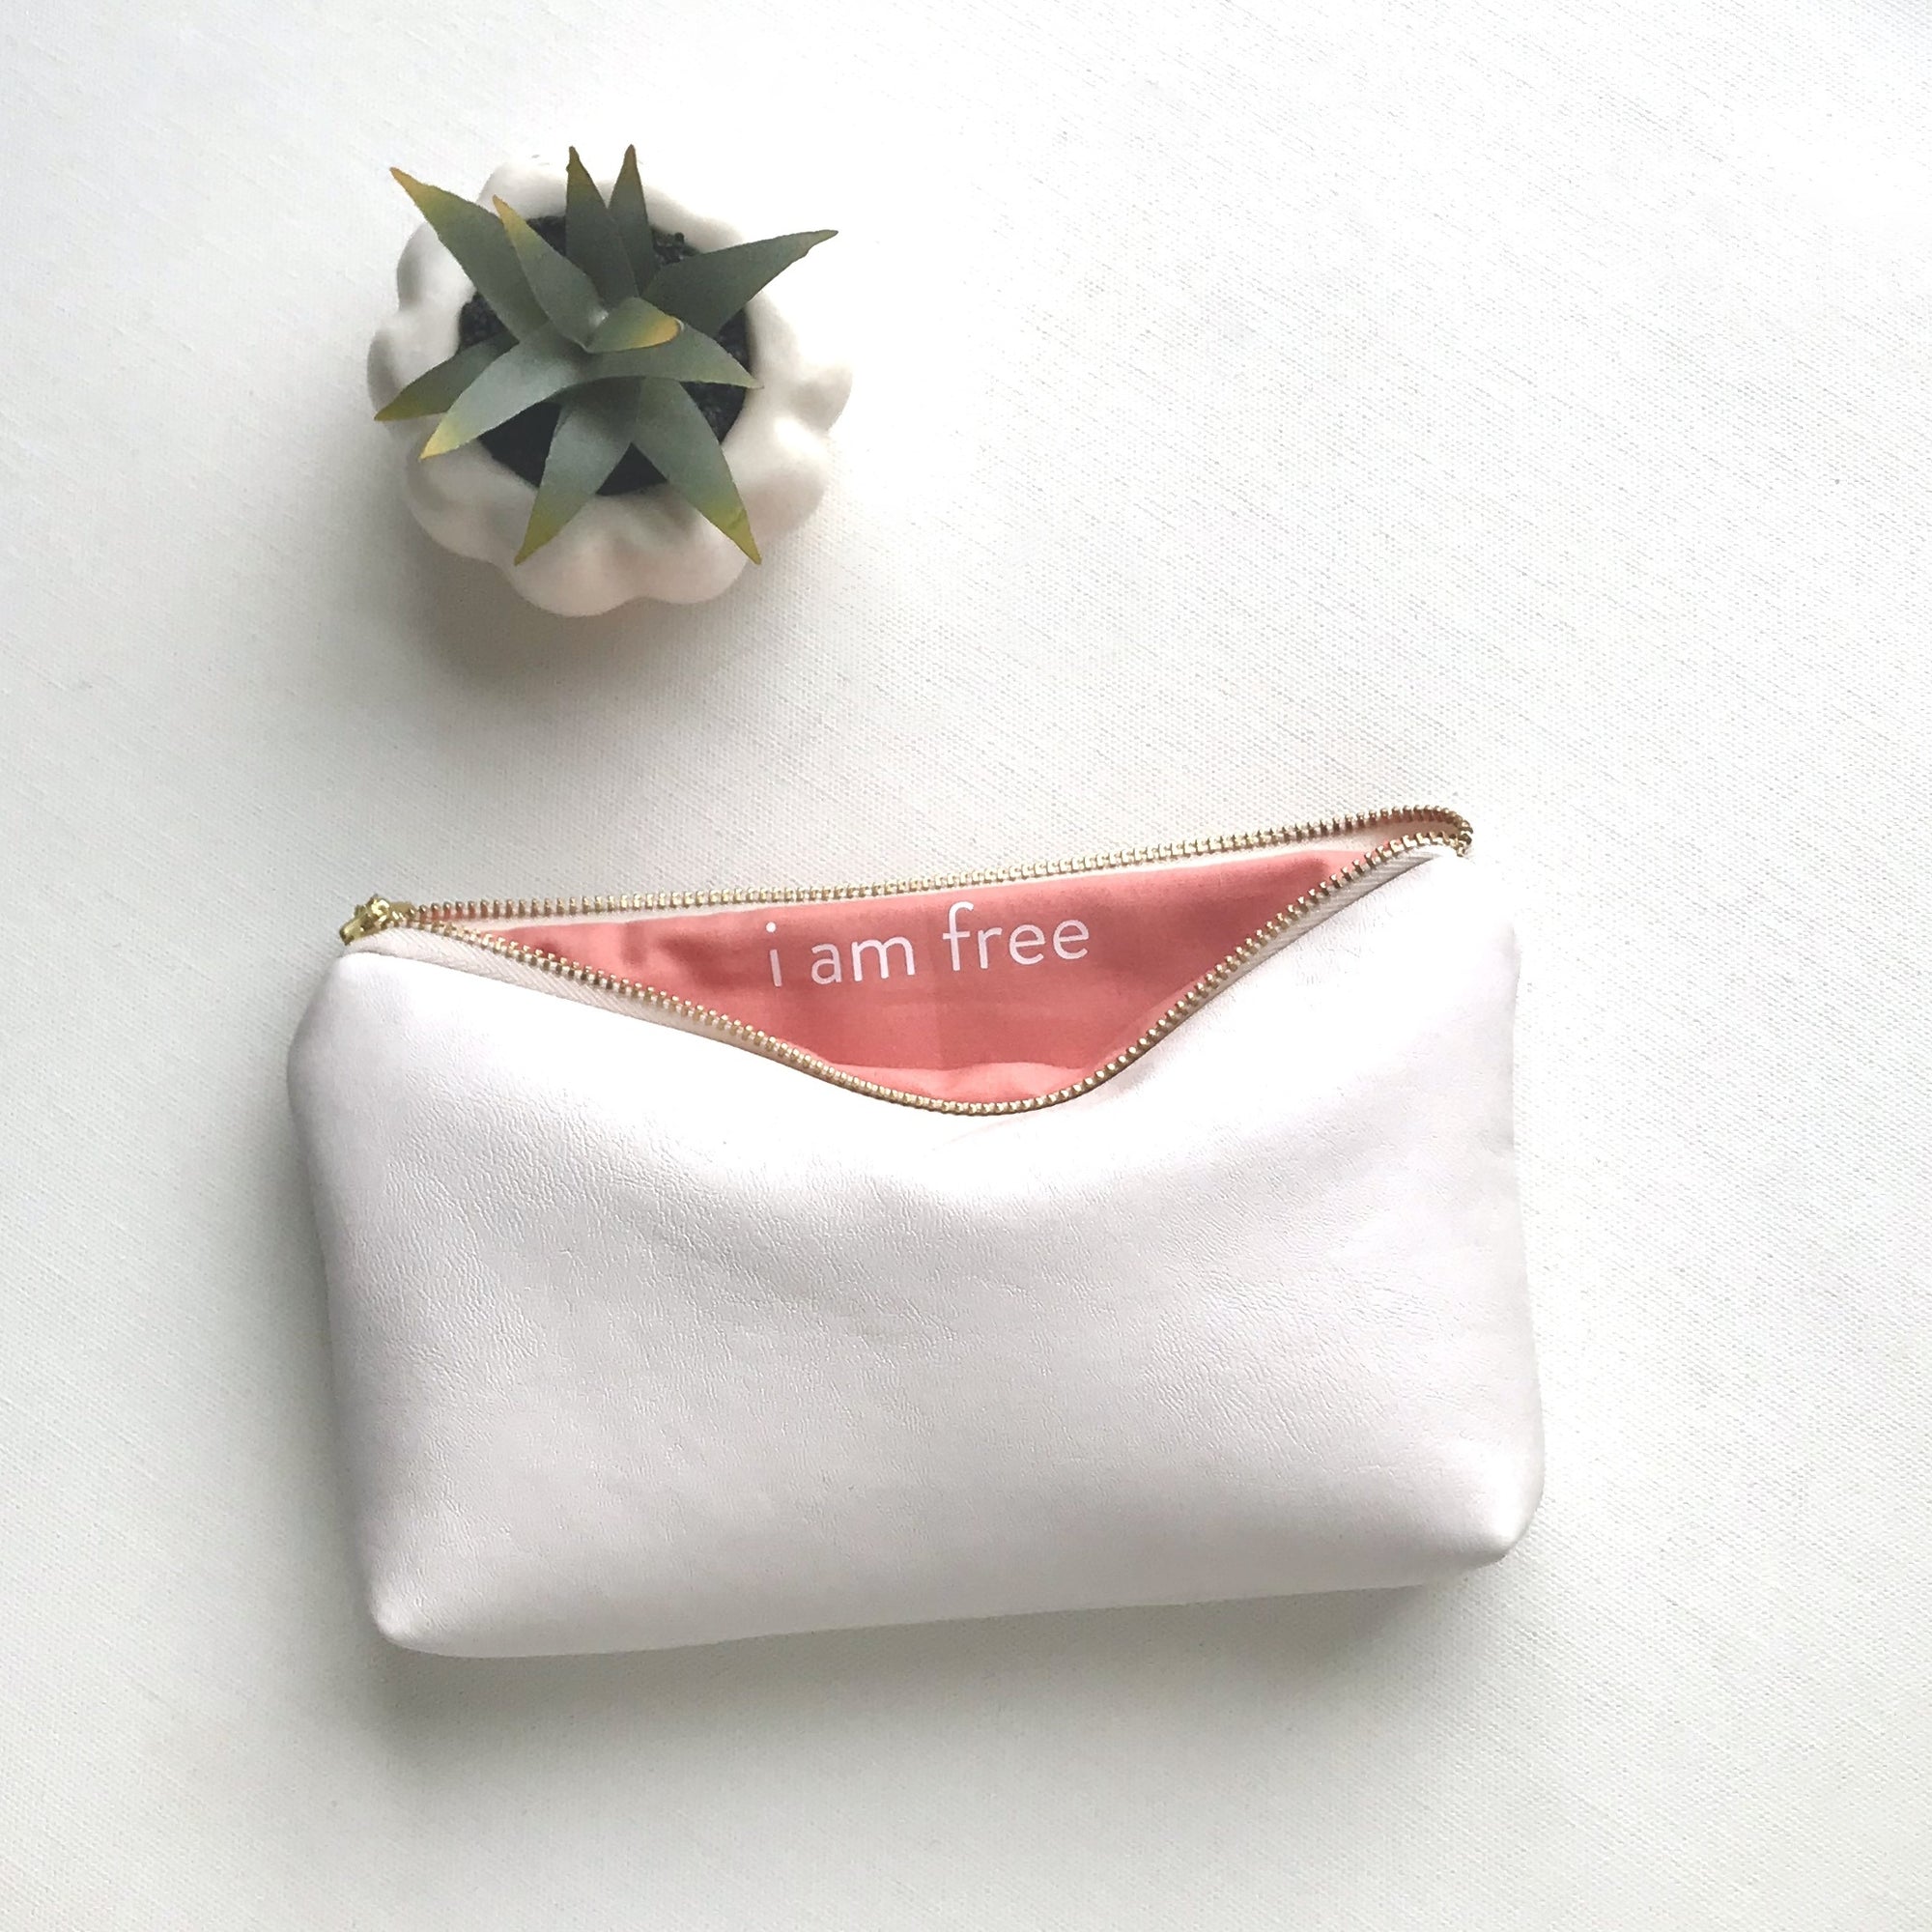 Human Made Leather Pouch WhiteHuman Made Leather Pouch White - OFour